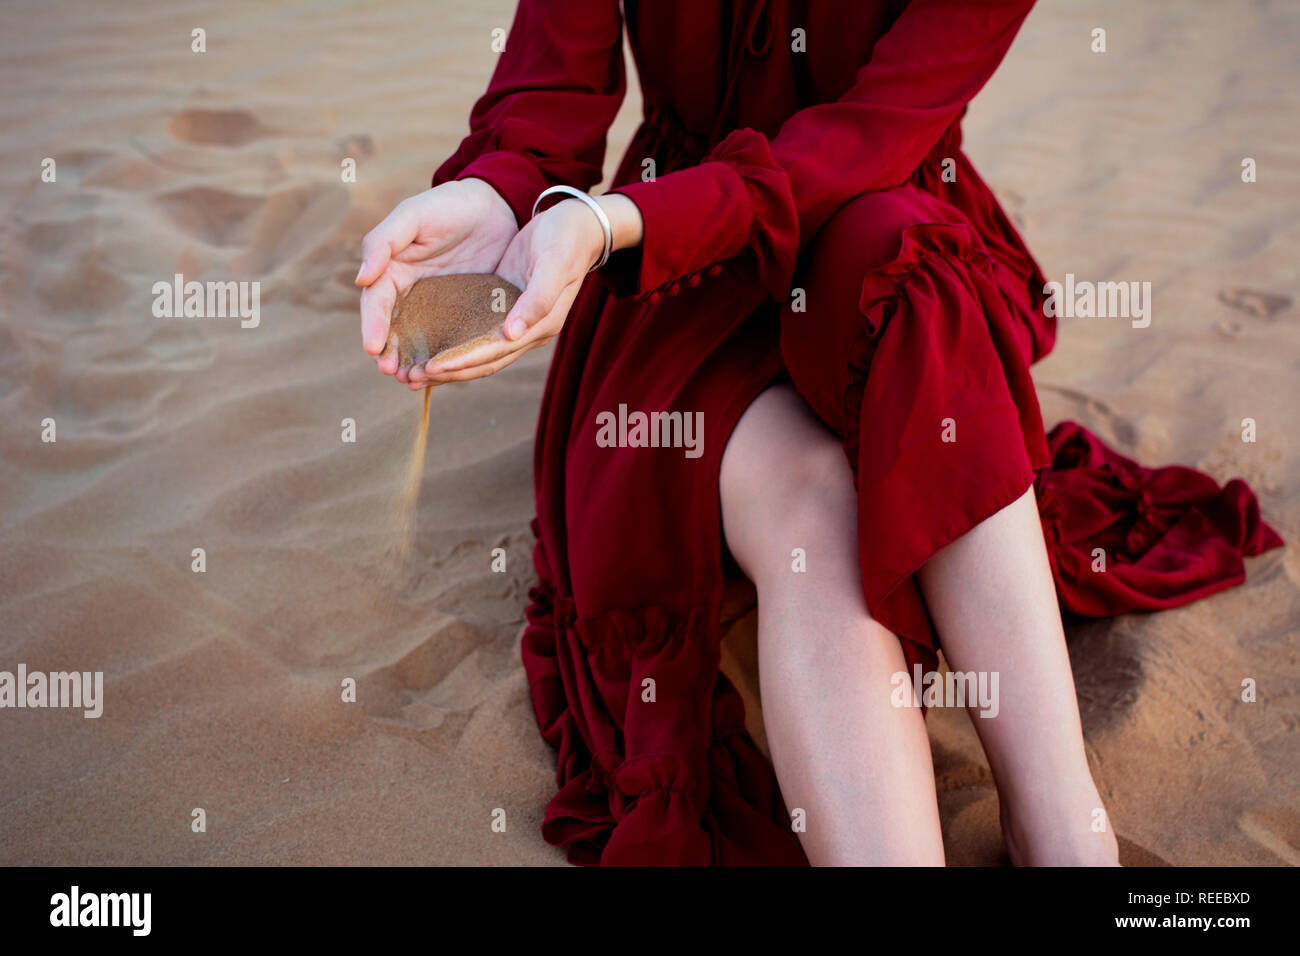 Woman holding sand in the desert close up view Stock Photo